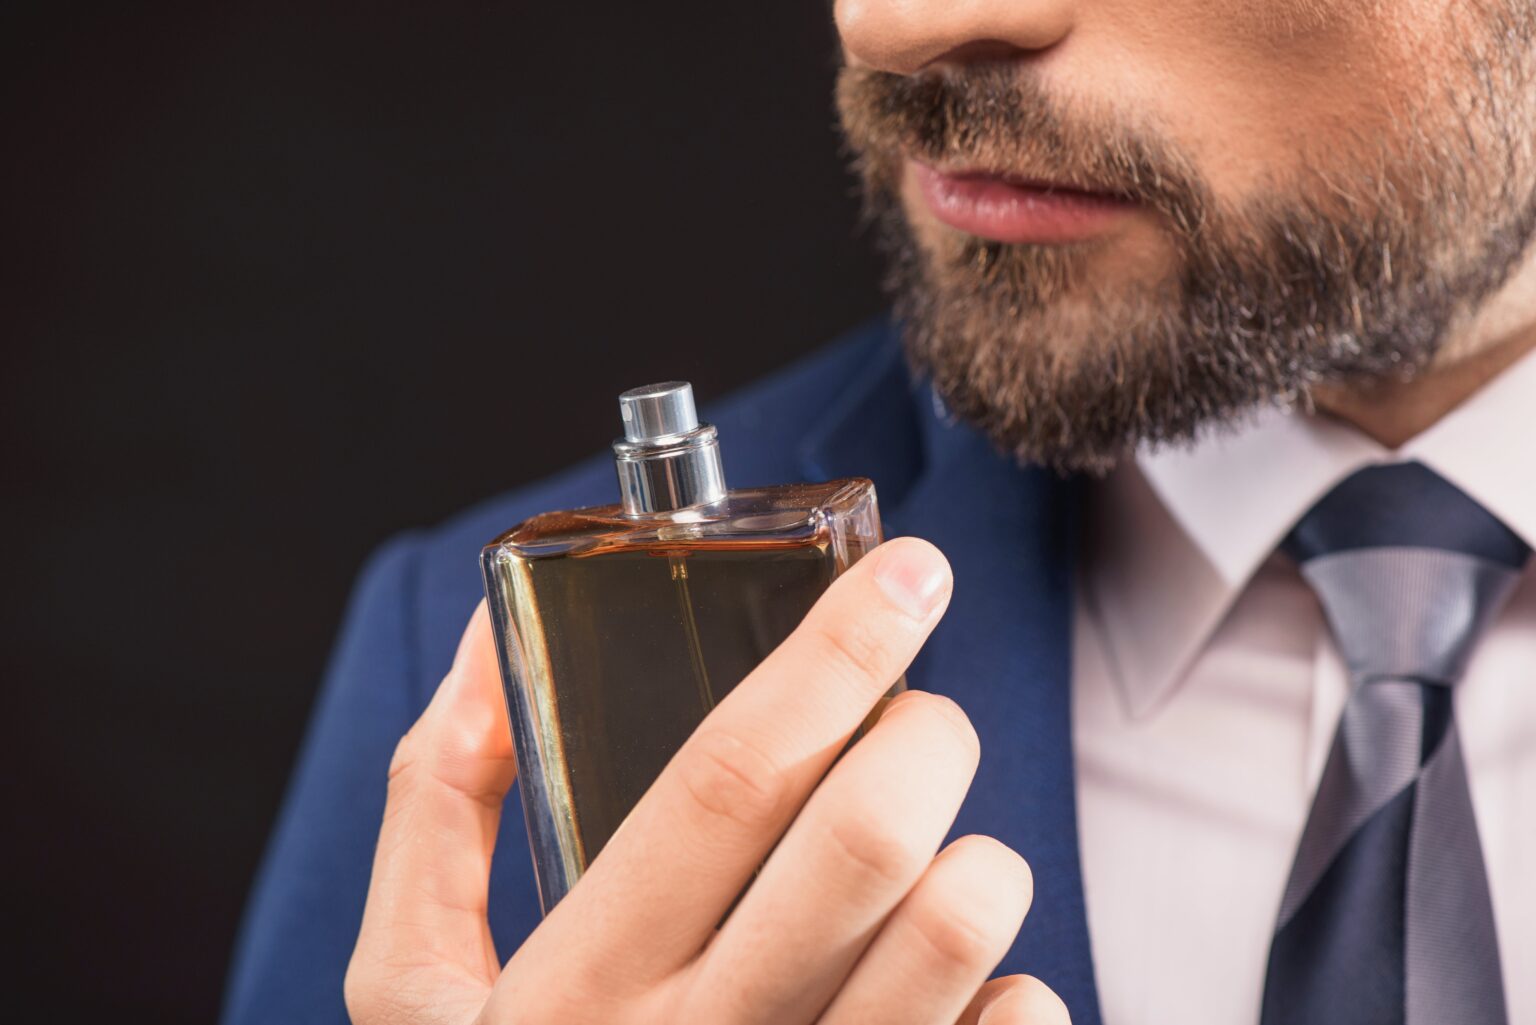 Learn about the best smelling colognes for men that will drive women wild. Discover what scents are trending and selling.